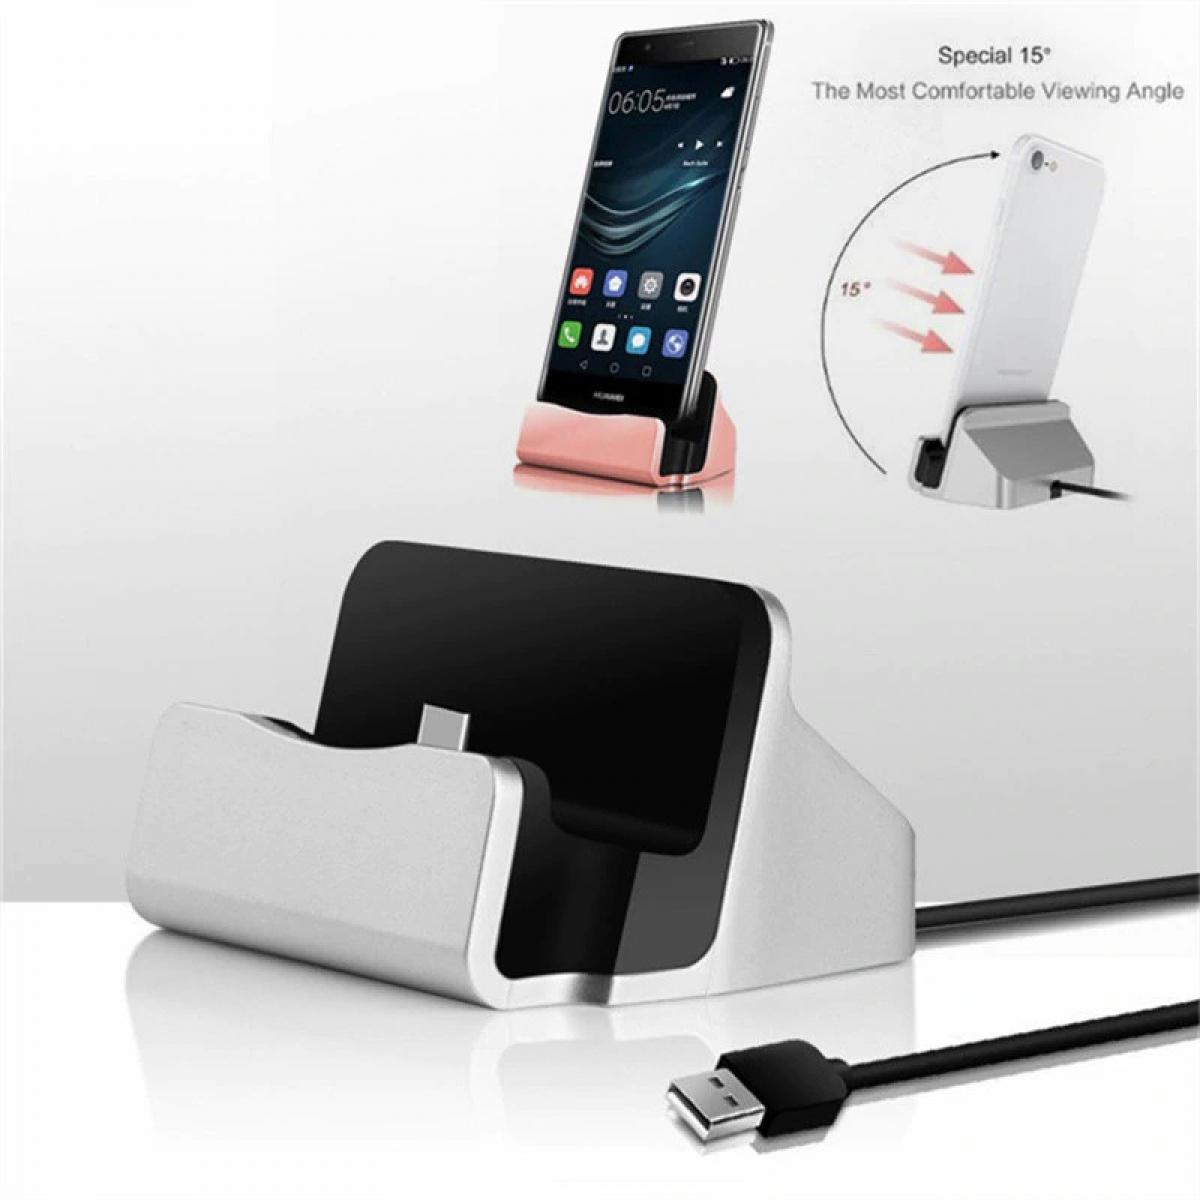 Shot - Station d'Accueil de Chargement pour SONY Xperia Z5 Smartphone Micro USB Support Chargeur Bureau (ROSE) - Station d'accueil smartphone